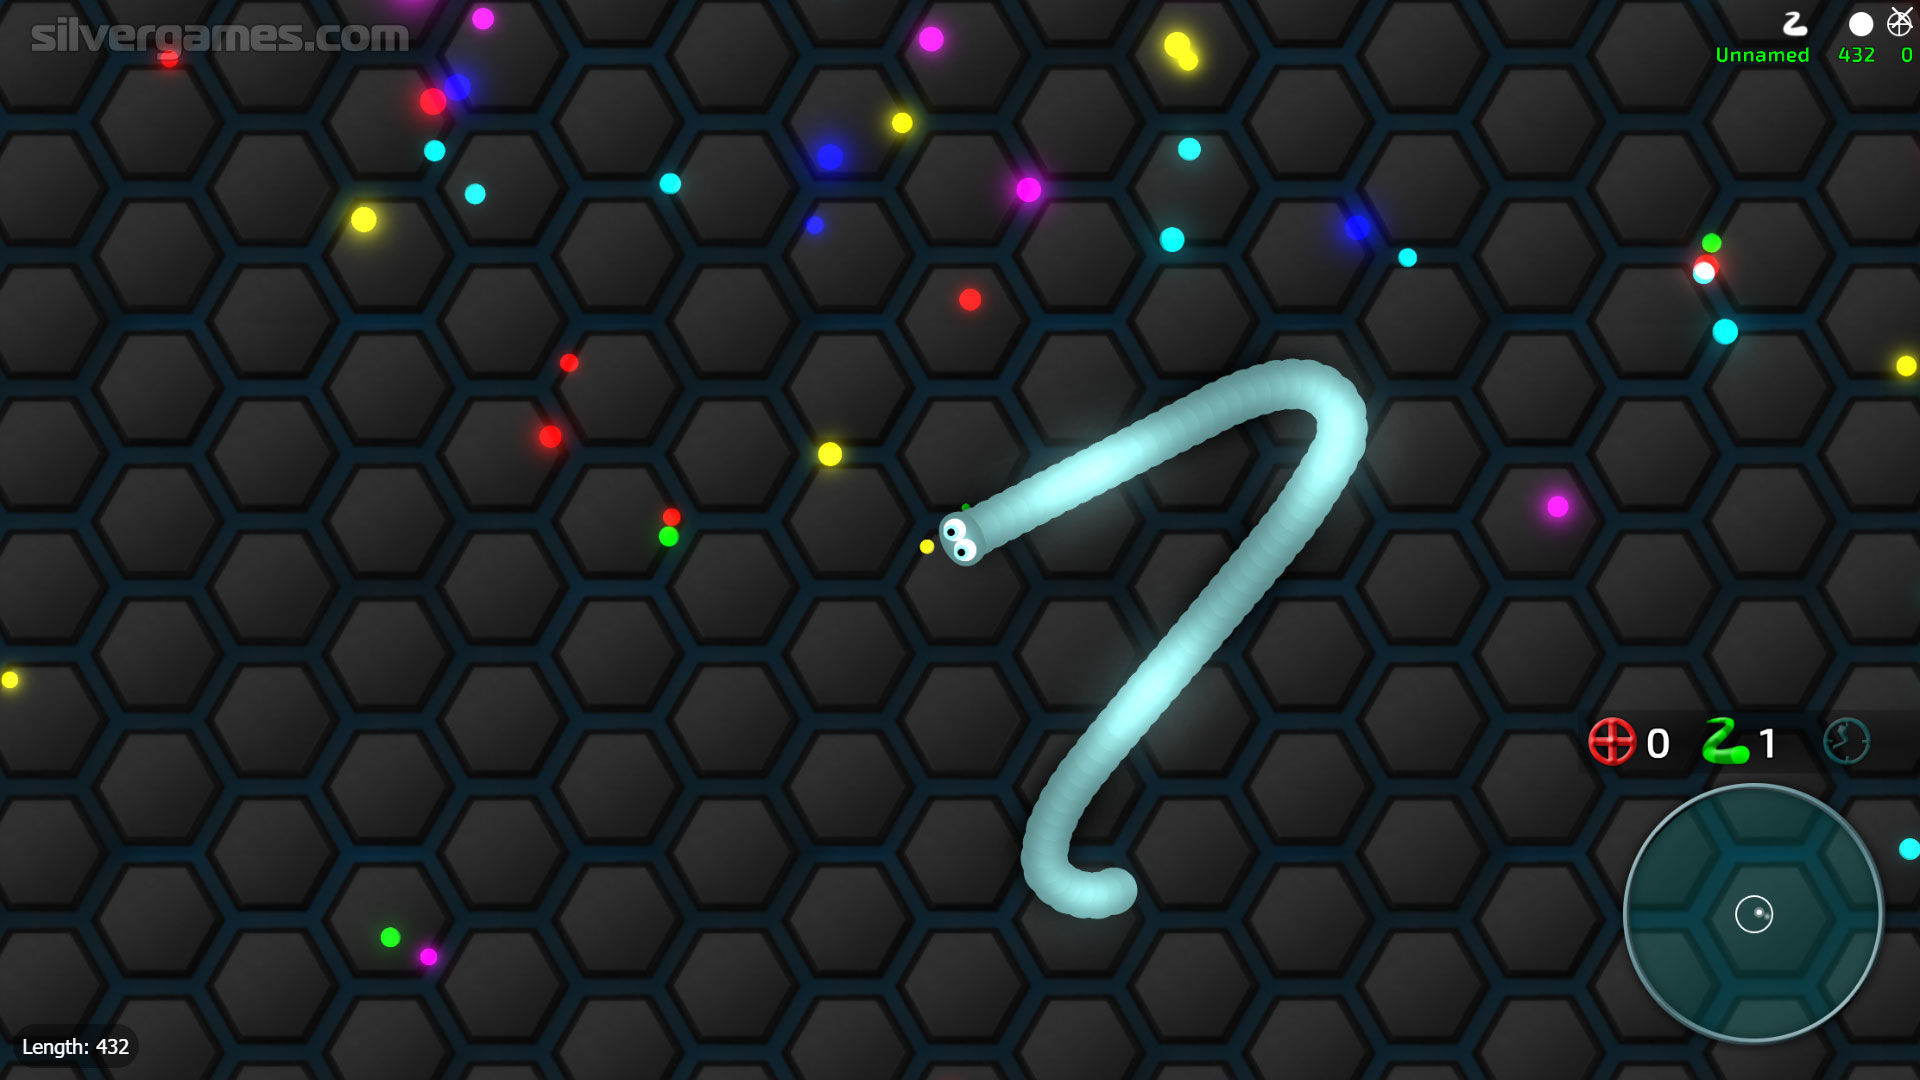 Slither Royale io — Play for free at